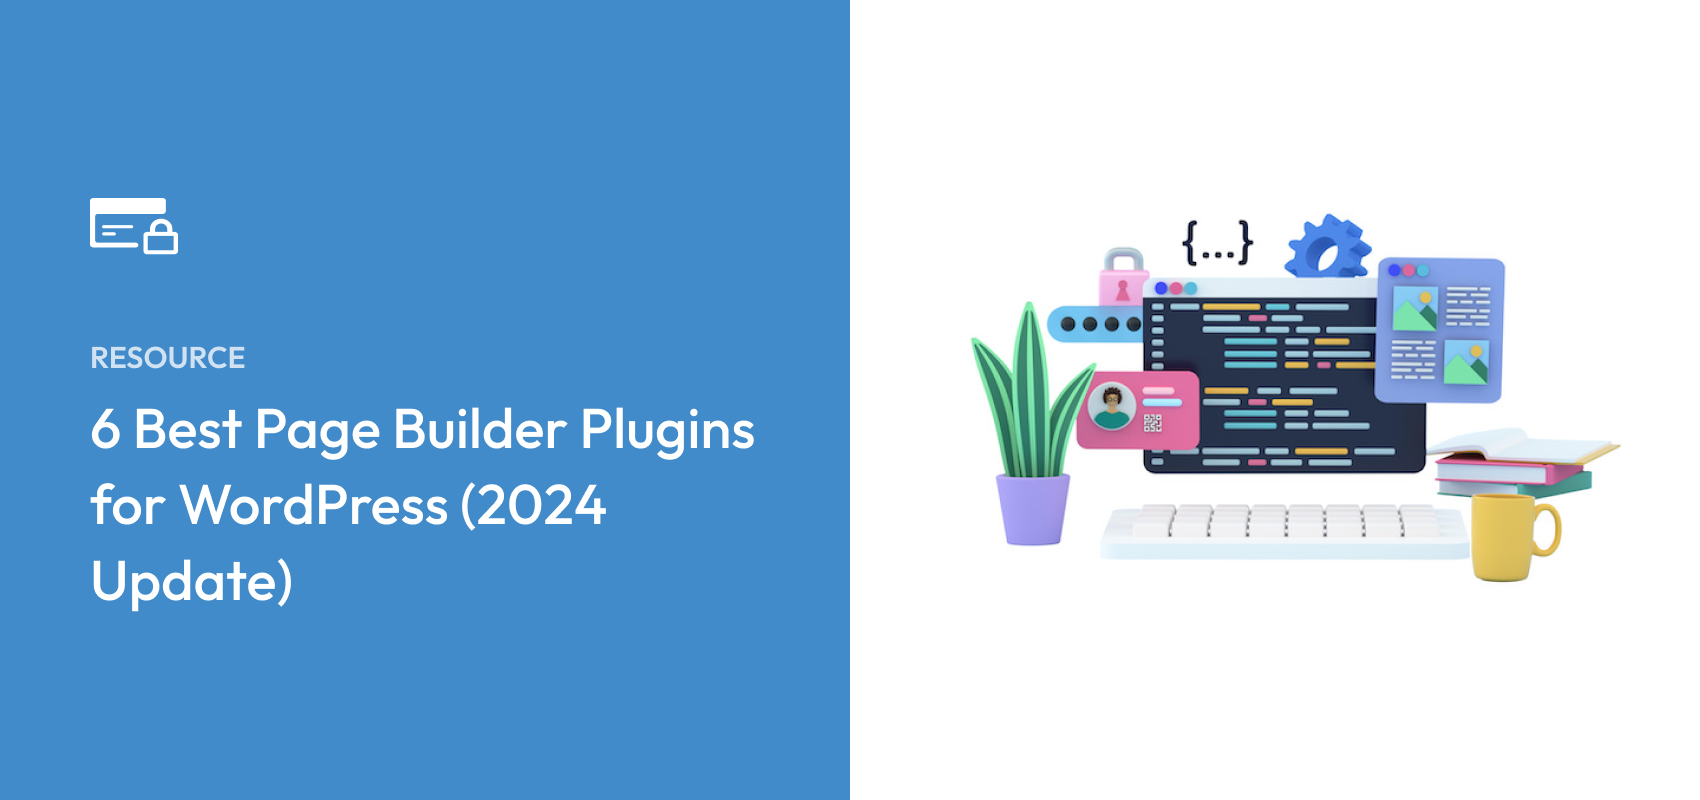 6 Best Page Builder Plugins for WordPress (Compared)